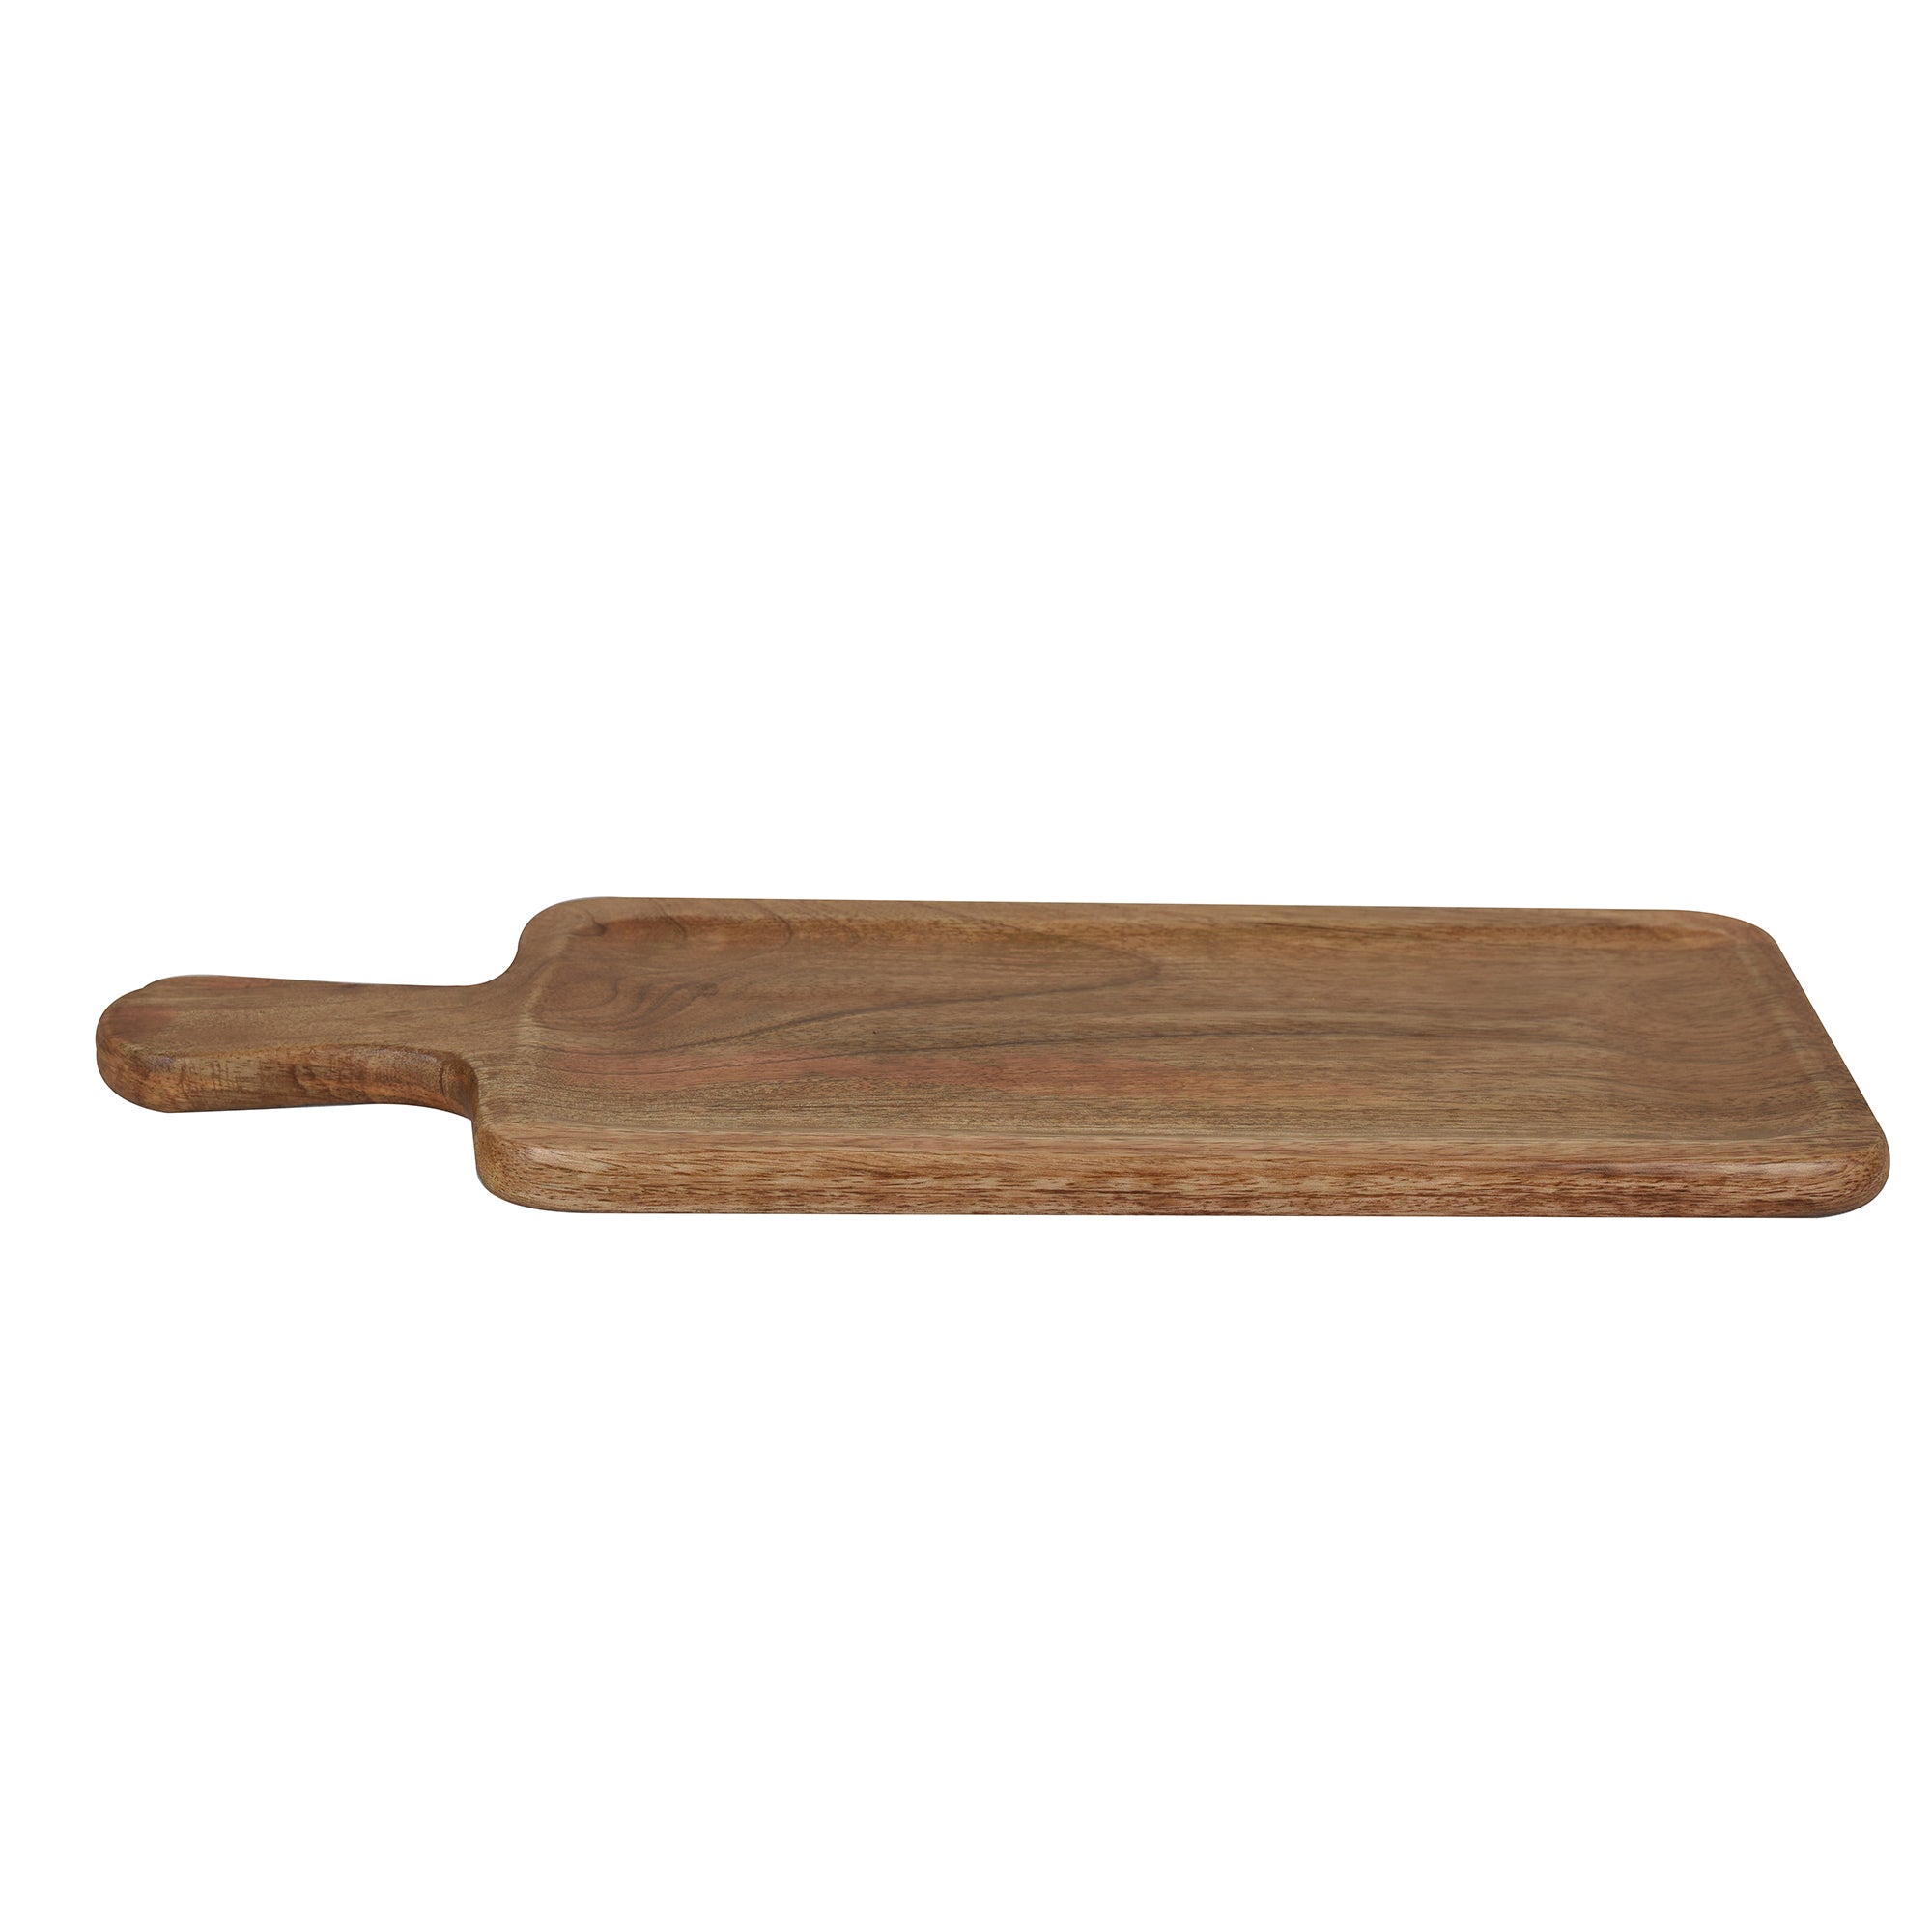 Aachman Wooden Rectangle Grooved Platter with Handle 17 inches